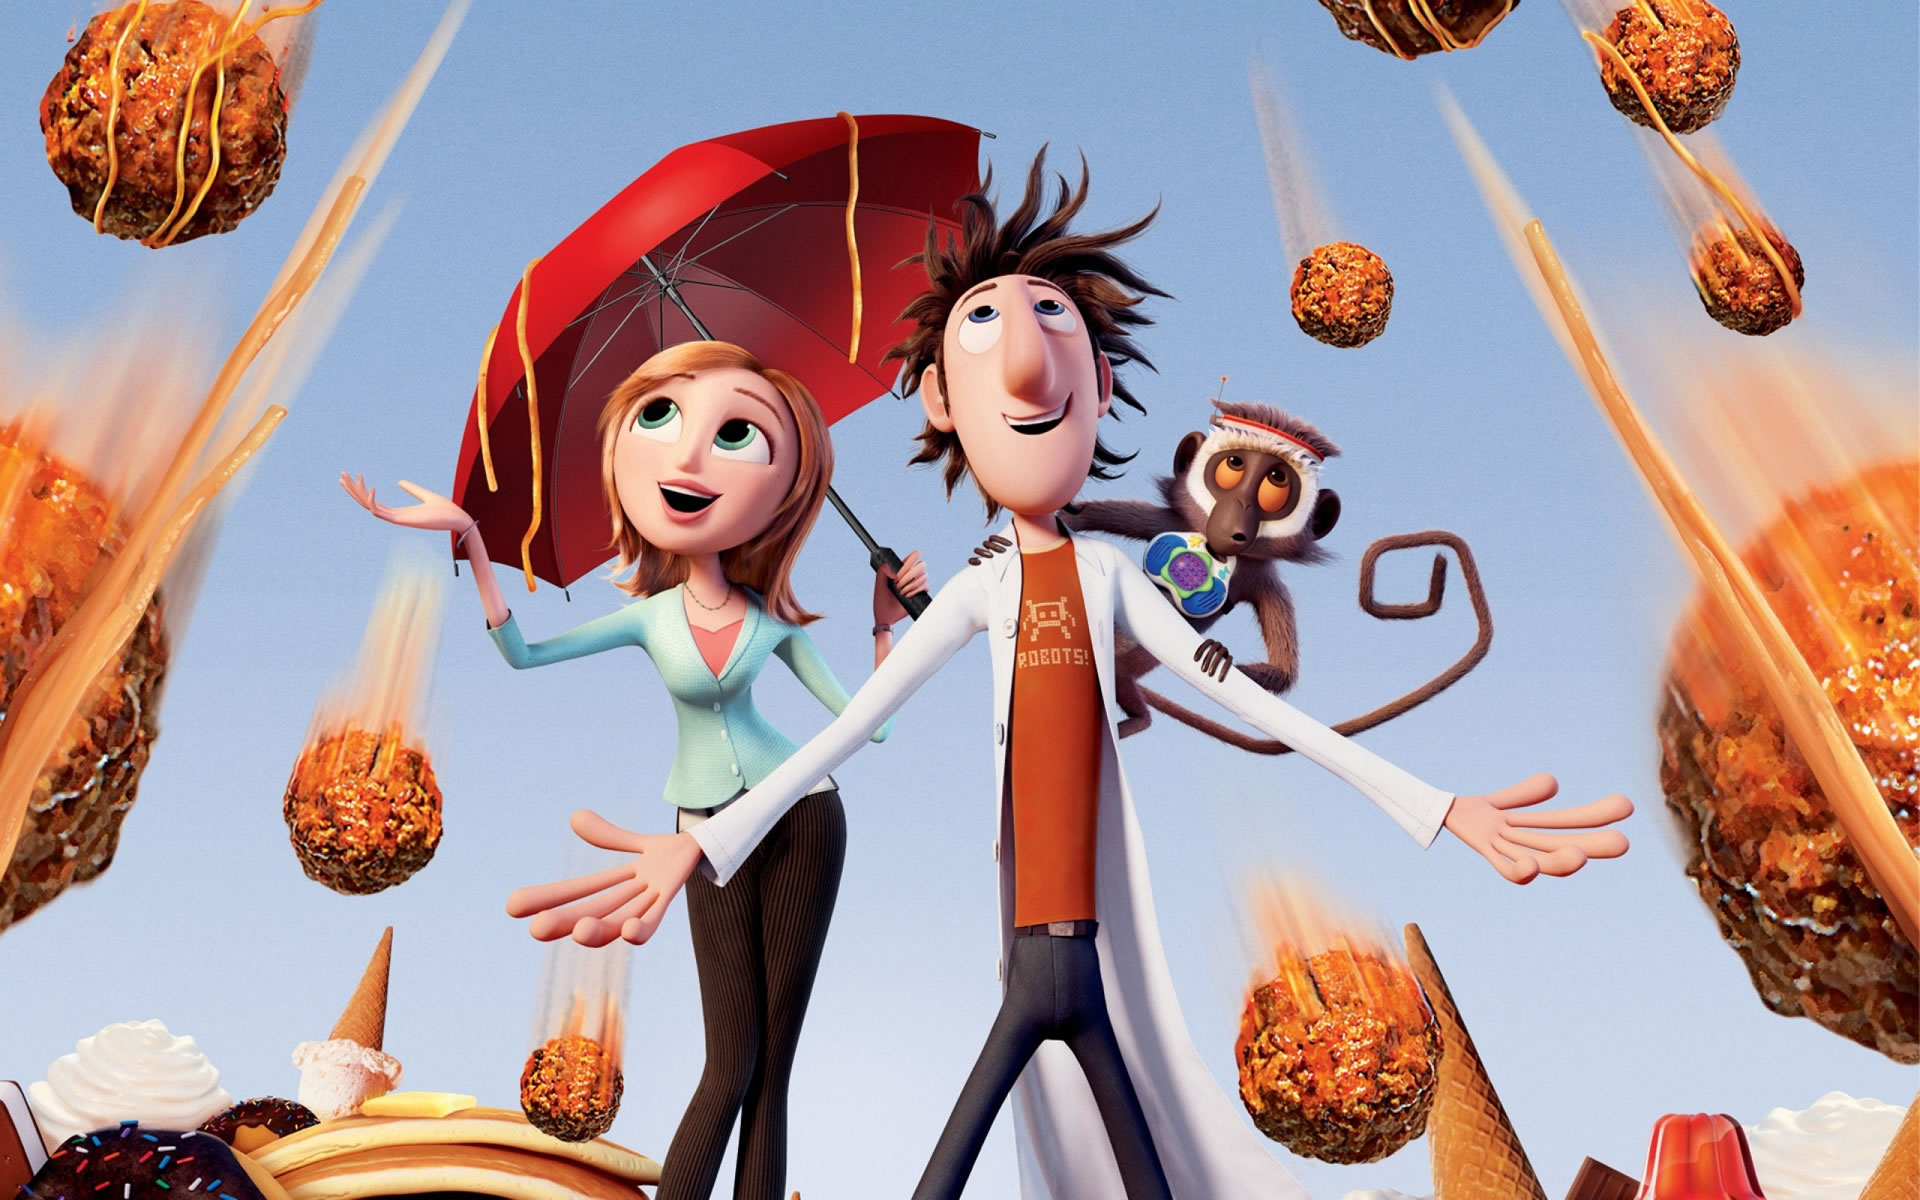 download wallpaper: cloudy with a chance of meatballs wallpaper